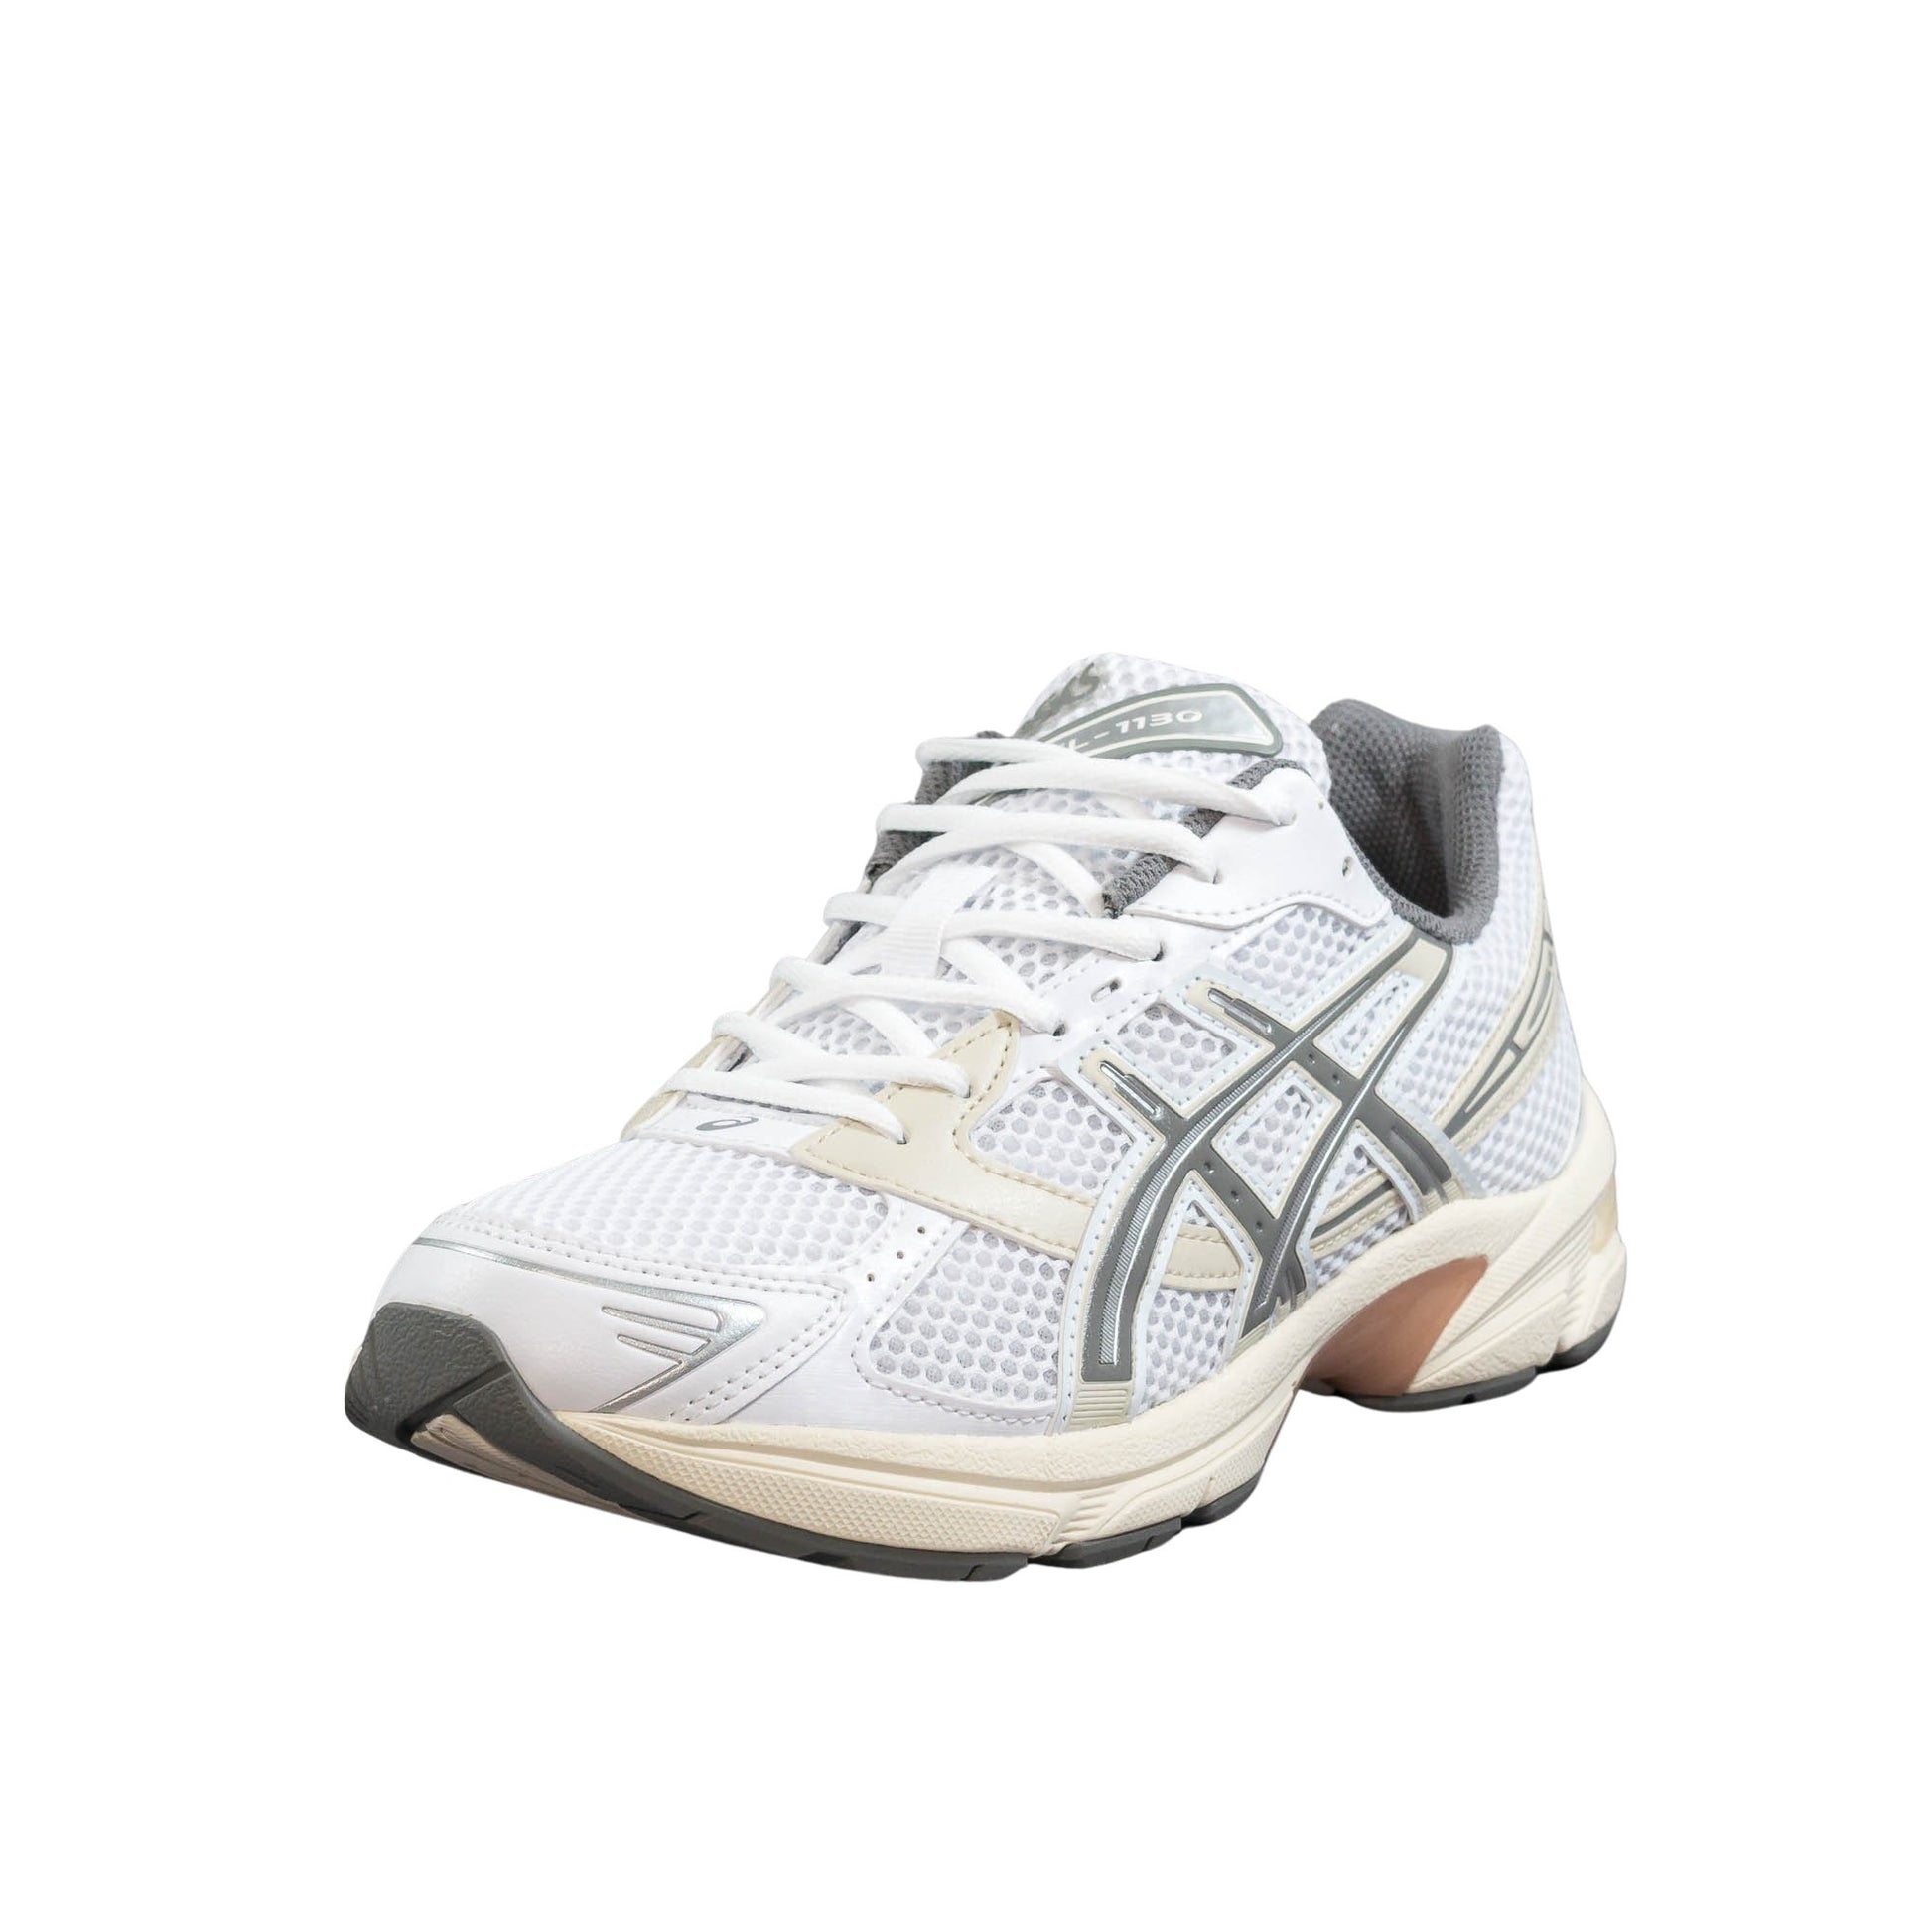 Asics Weiss (1201A256-112) Gel-1130 – Goldjunge-Store Sportstyle